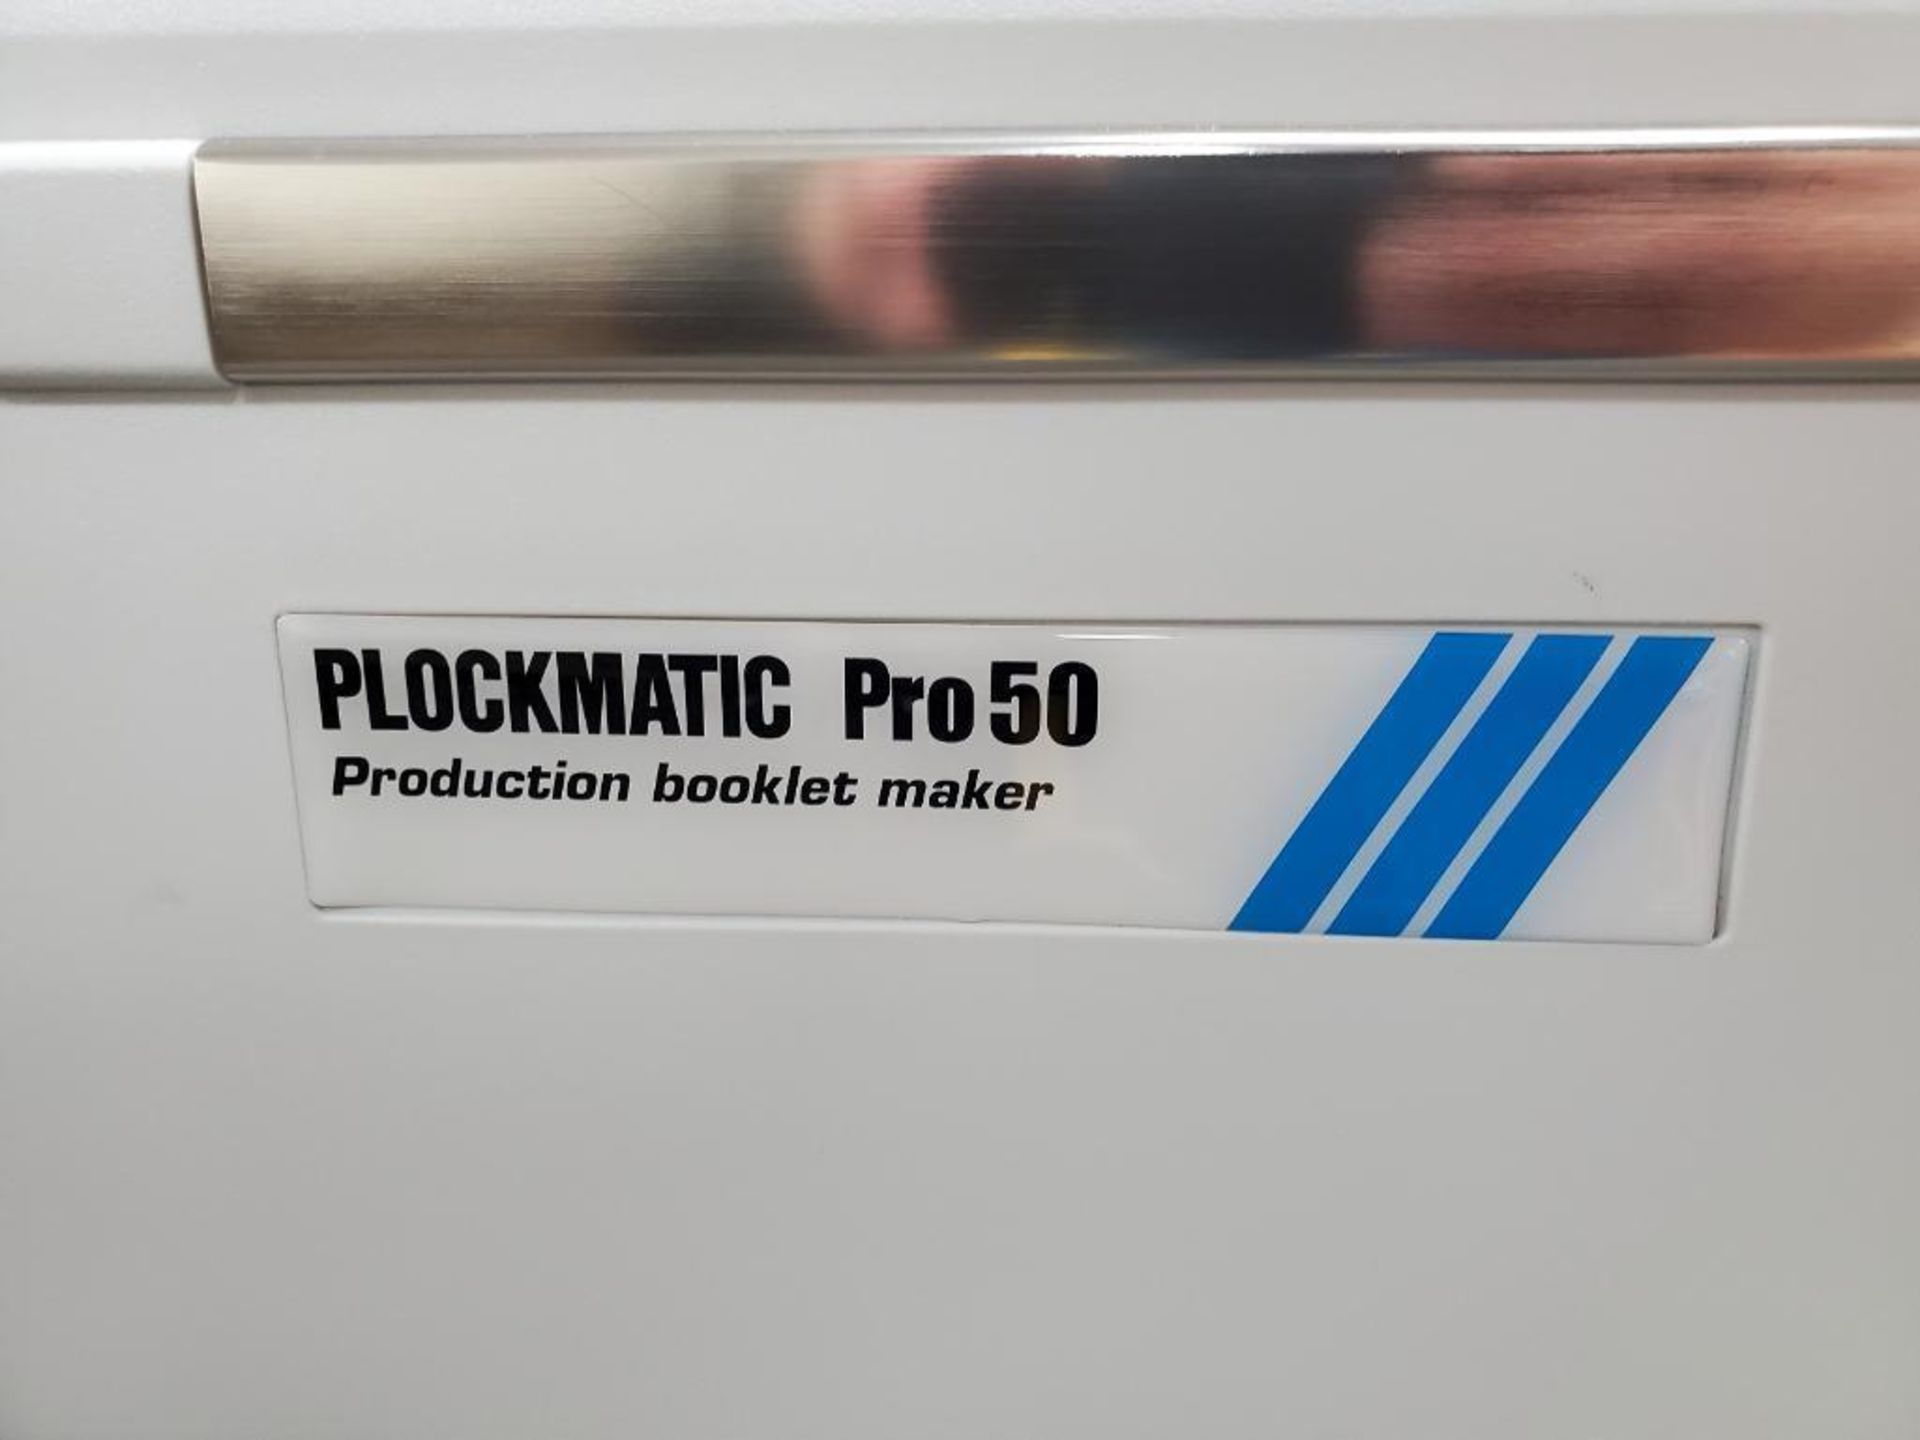 2012 Xerox Color 1000 Press Printer, Plockmatic Pro 50 Production Booklet Maker Finisher, Stacker Ca - Image 8 of 21